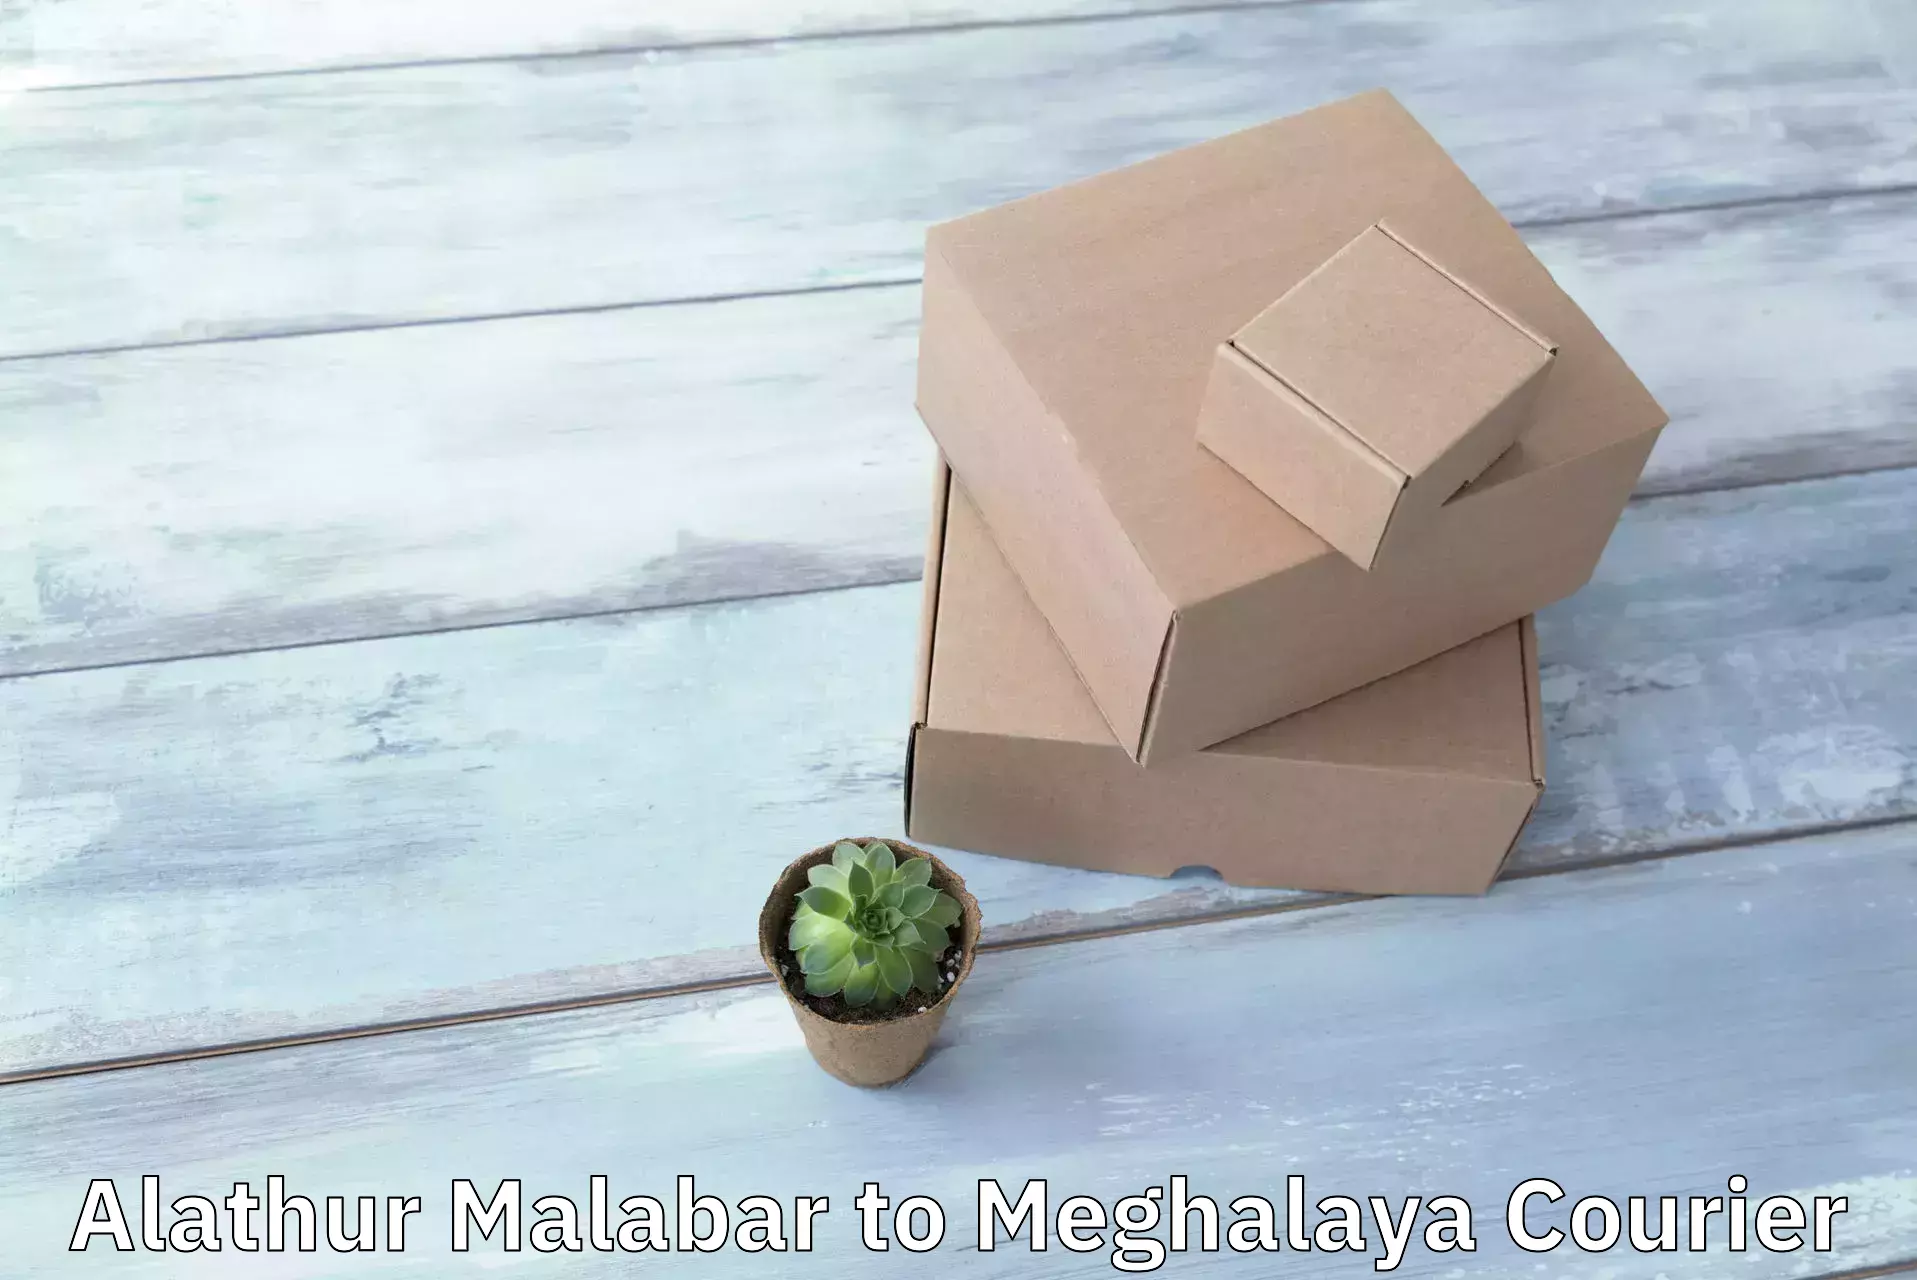 Full-service courier options Alathur Malabar to Umsaw